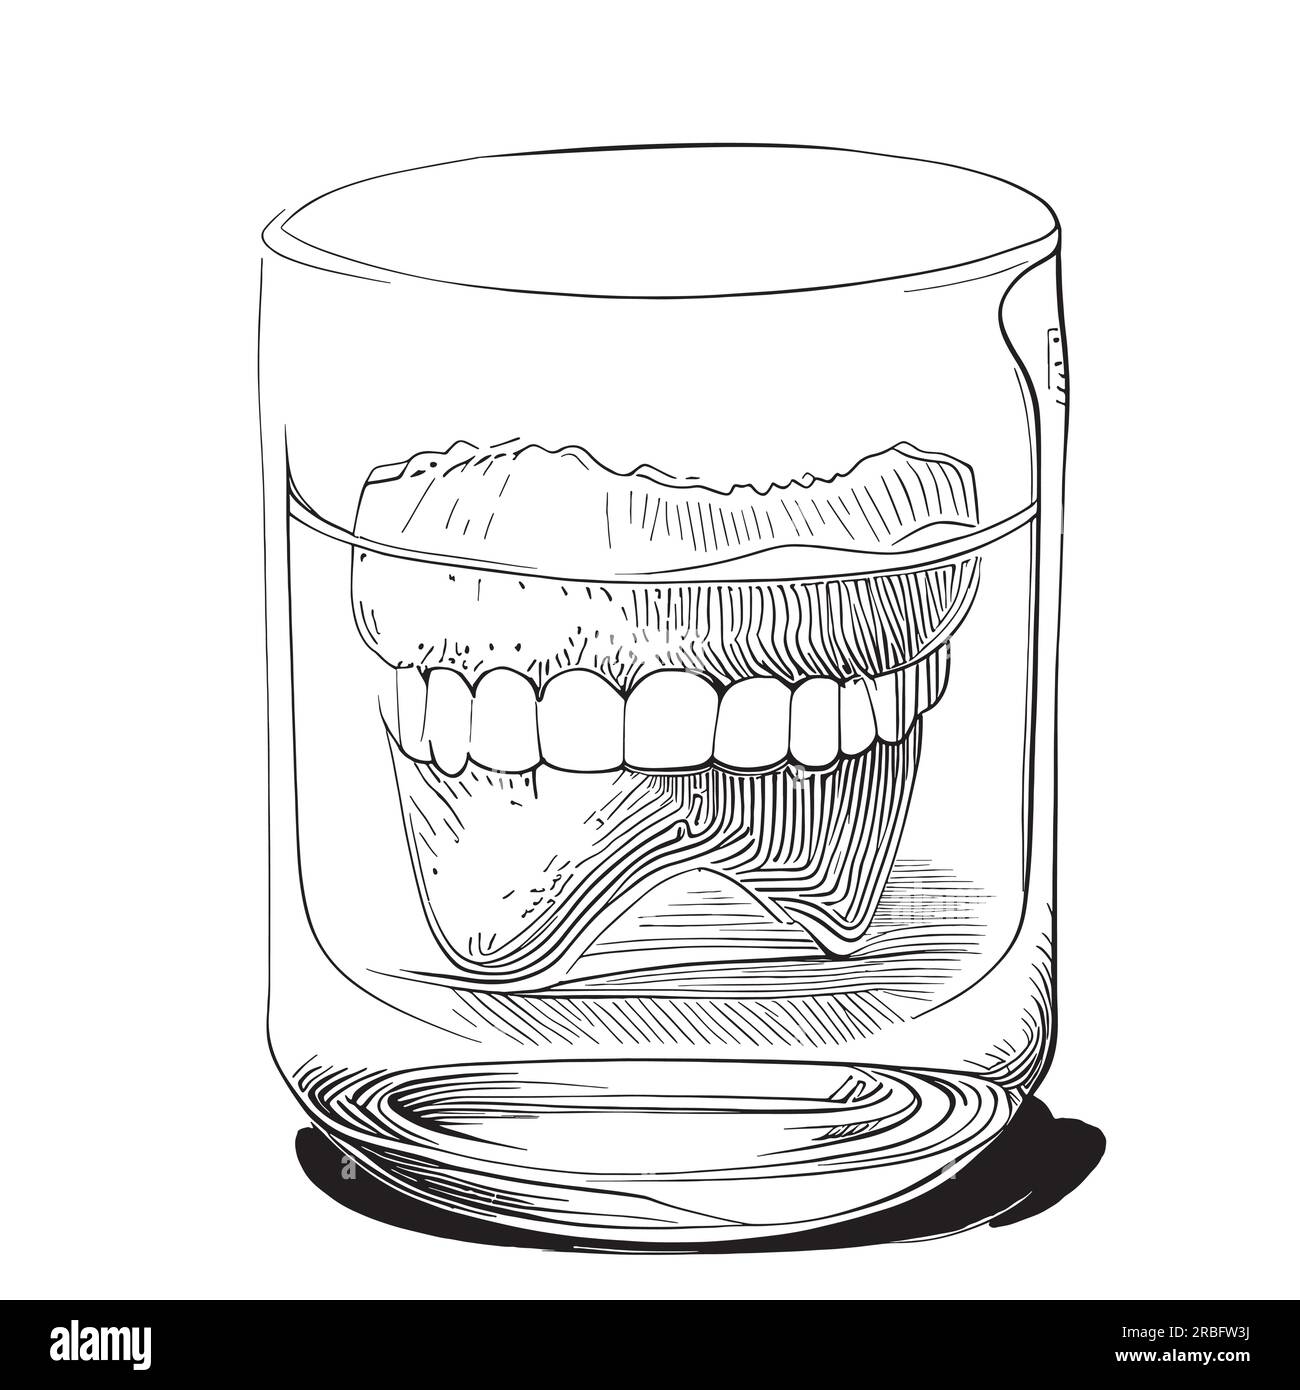 Denture in a glass sketch hand drawn engraving style llustration Stock Vector